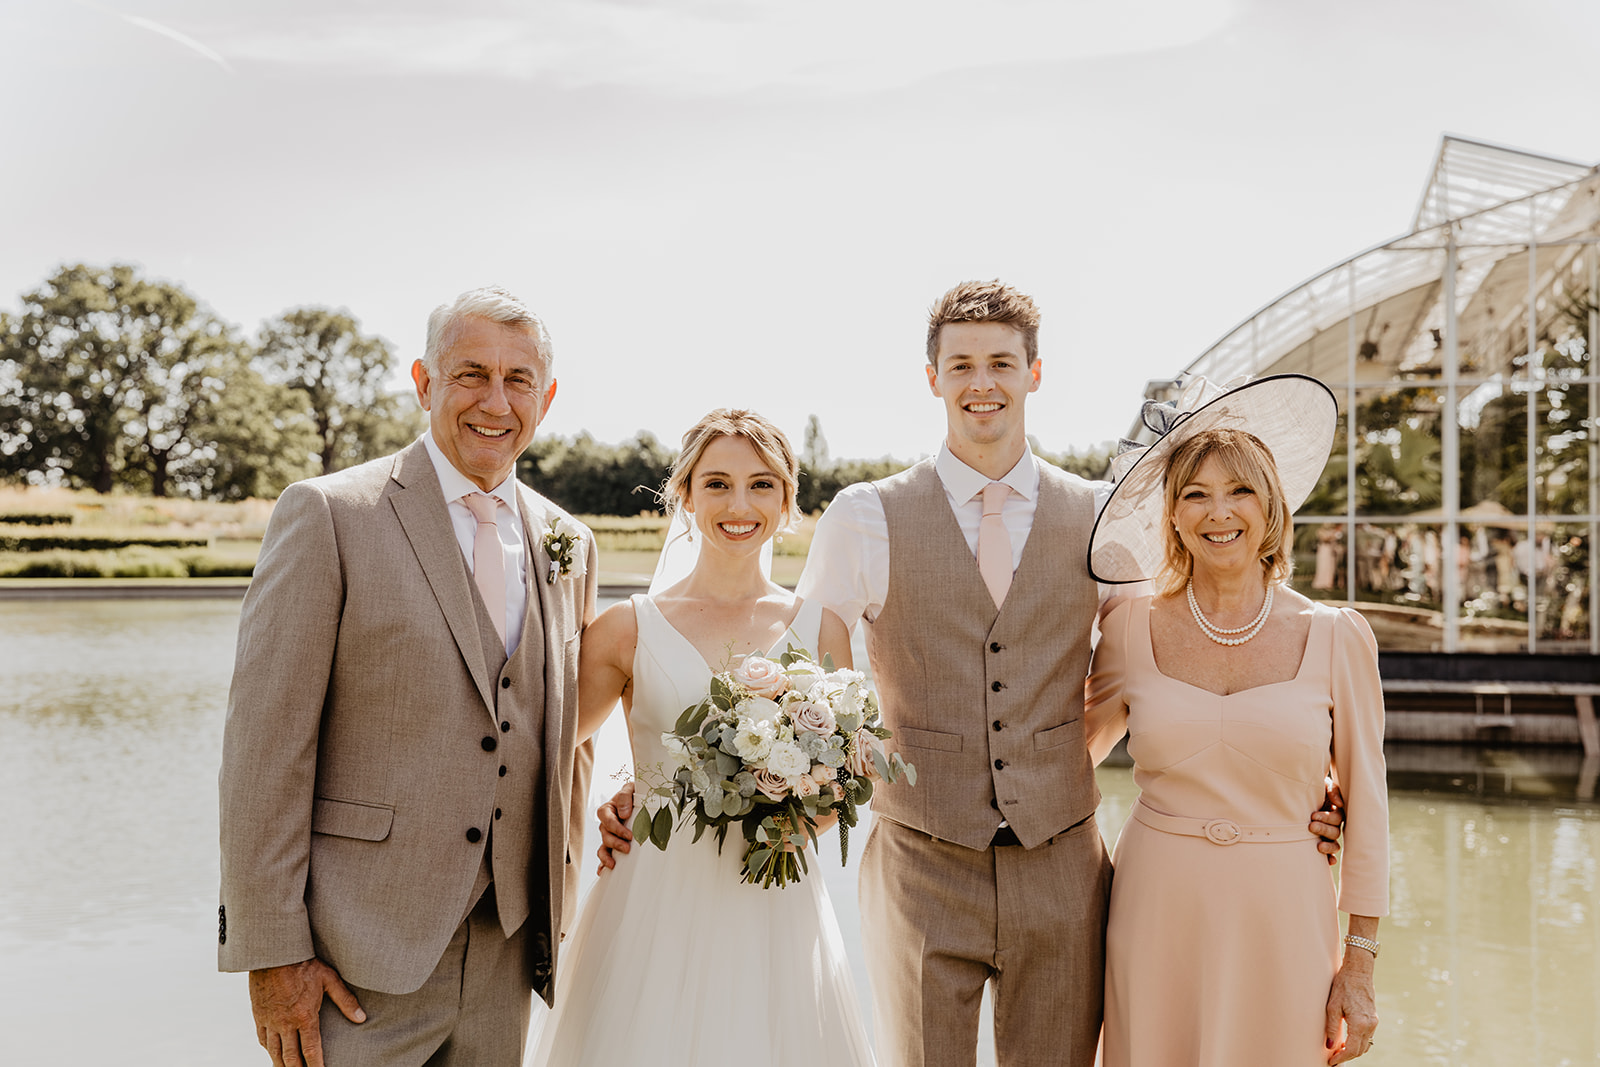 Bride, groom and family at a RHS Gardens Wisley Wedding. By Olive Joy Photography